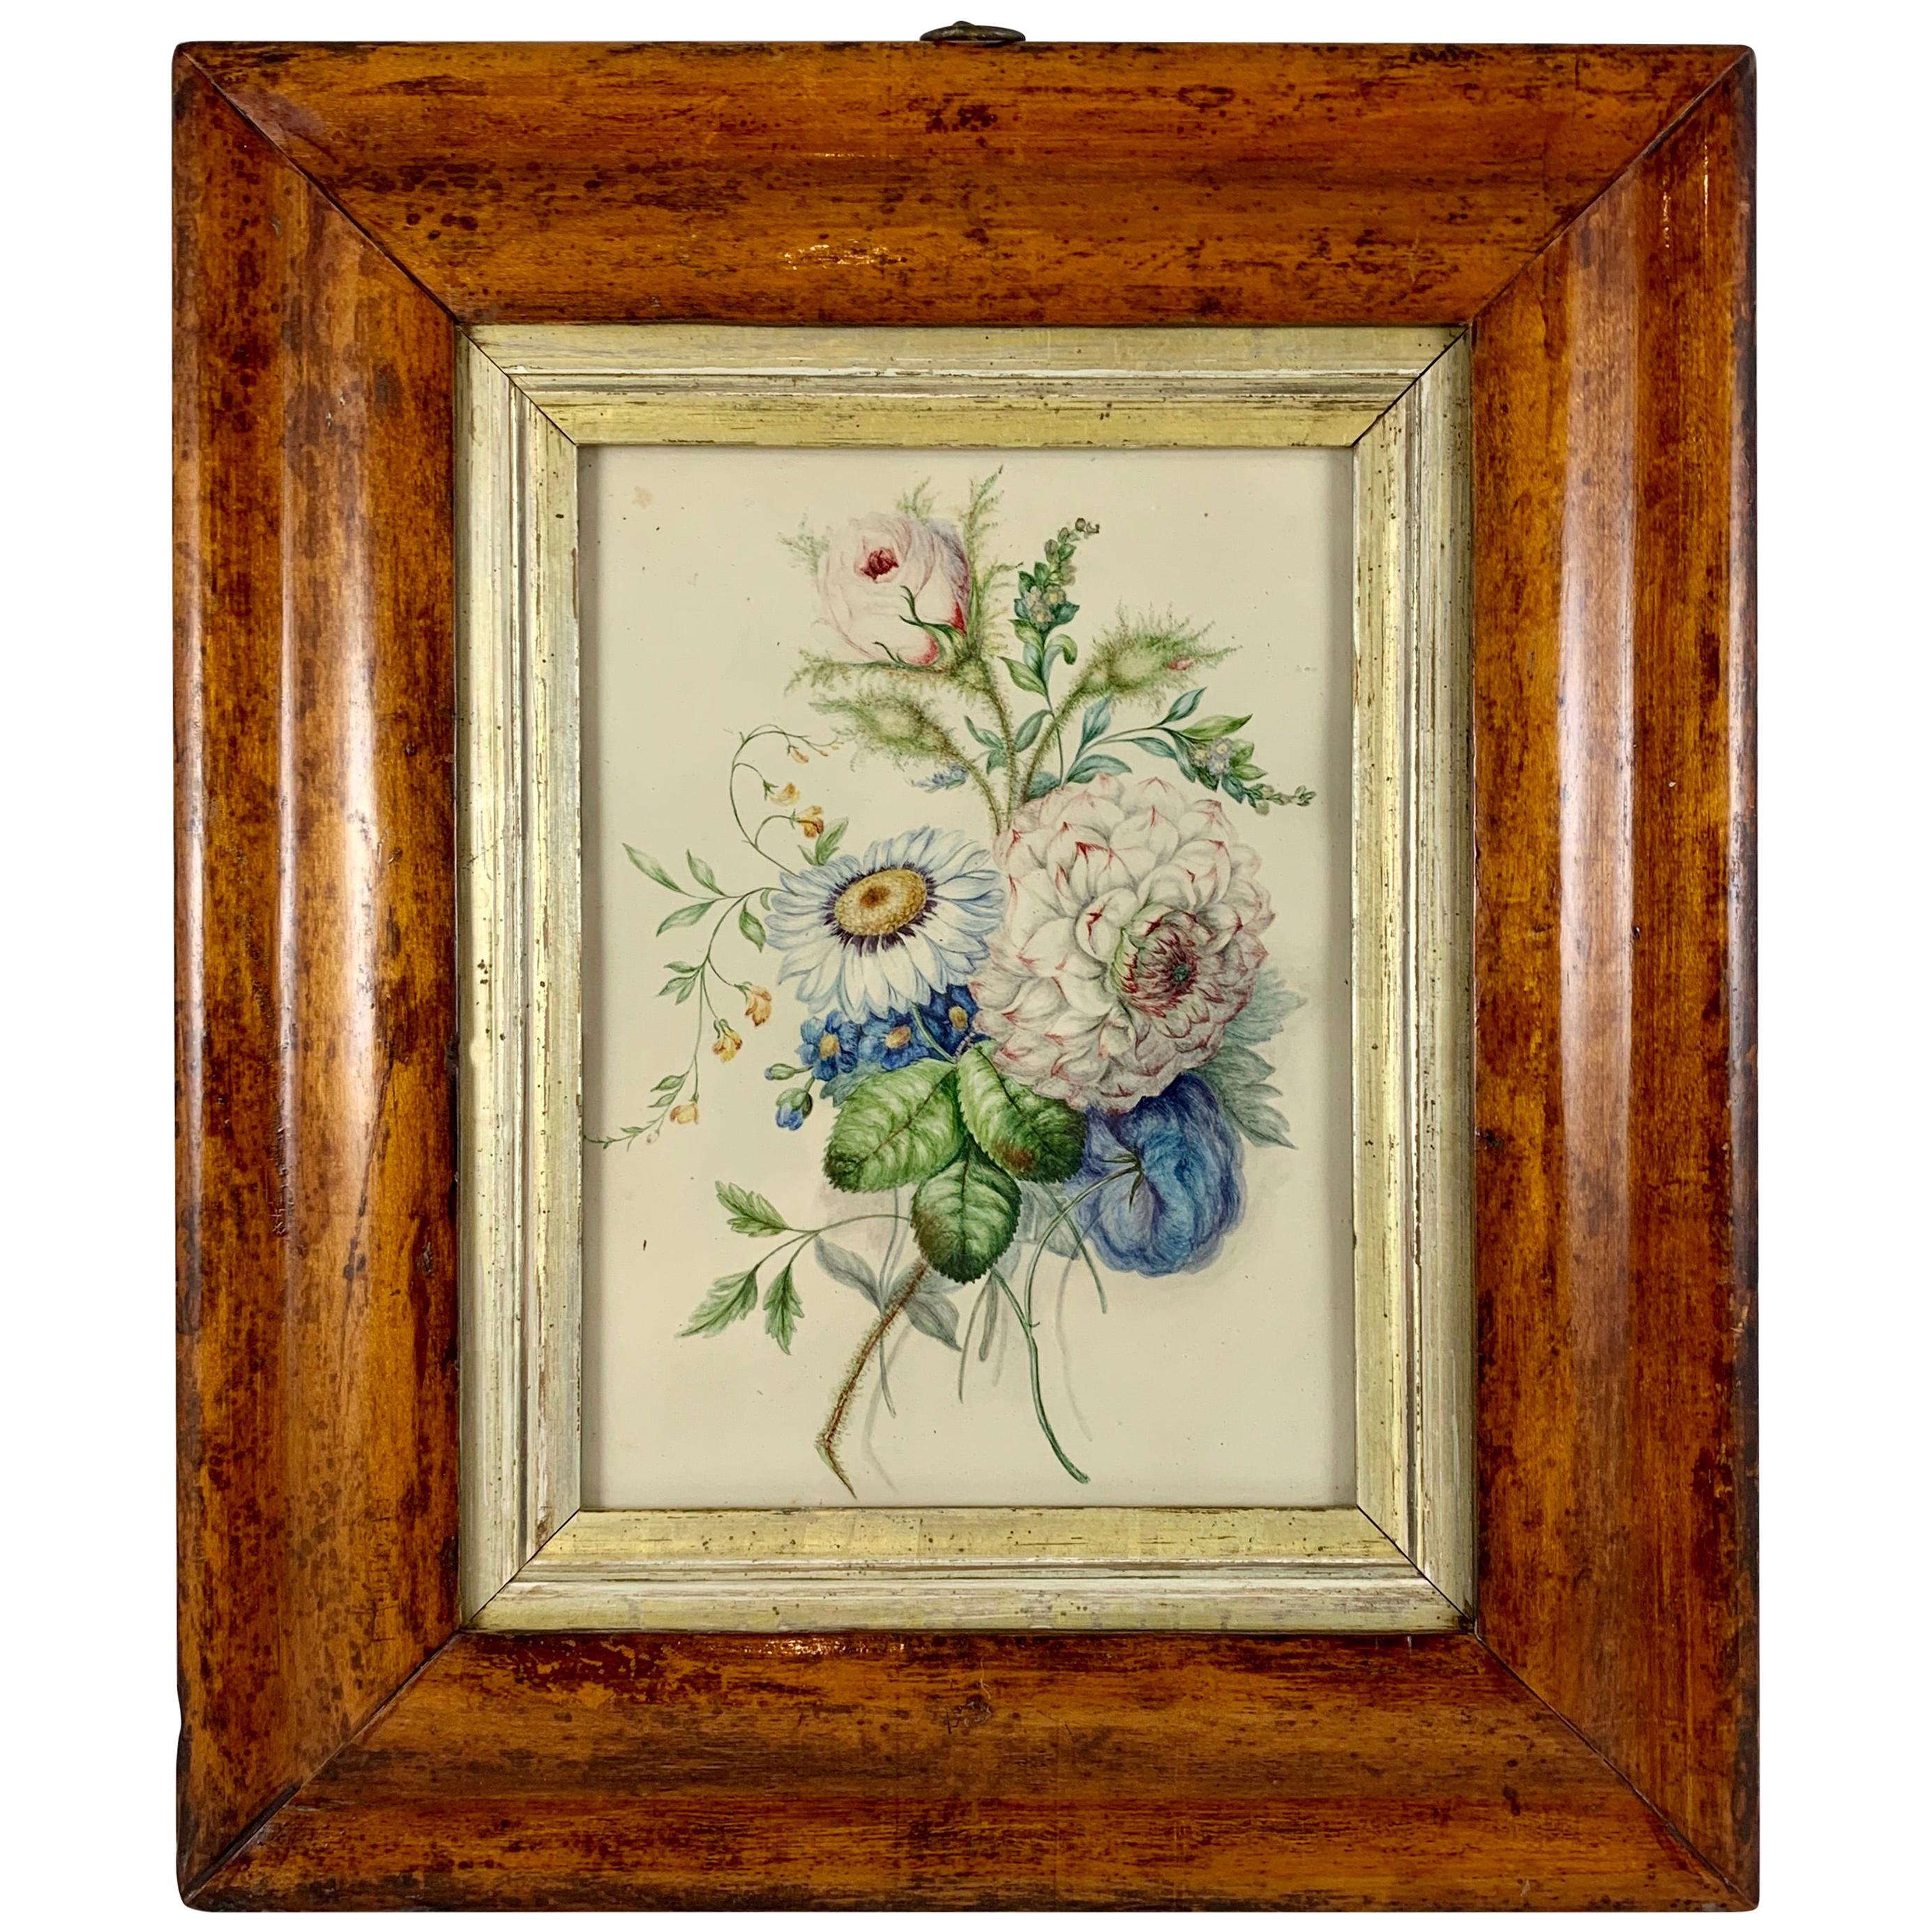 An original British School Regency period watercolor, circa 1780-1835, mounted in a Georgian period fruitwood frame. These watercolors were largely painted by young girls from aristocratic families during the Jane Austen period. The arts of painting